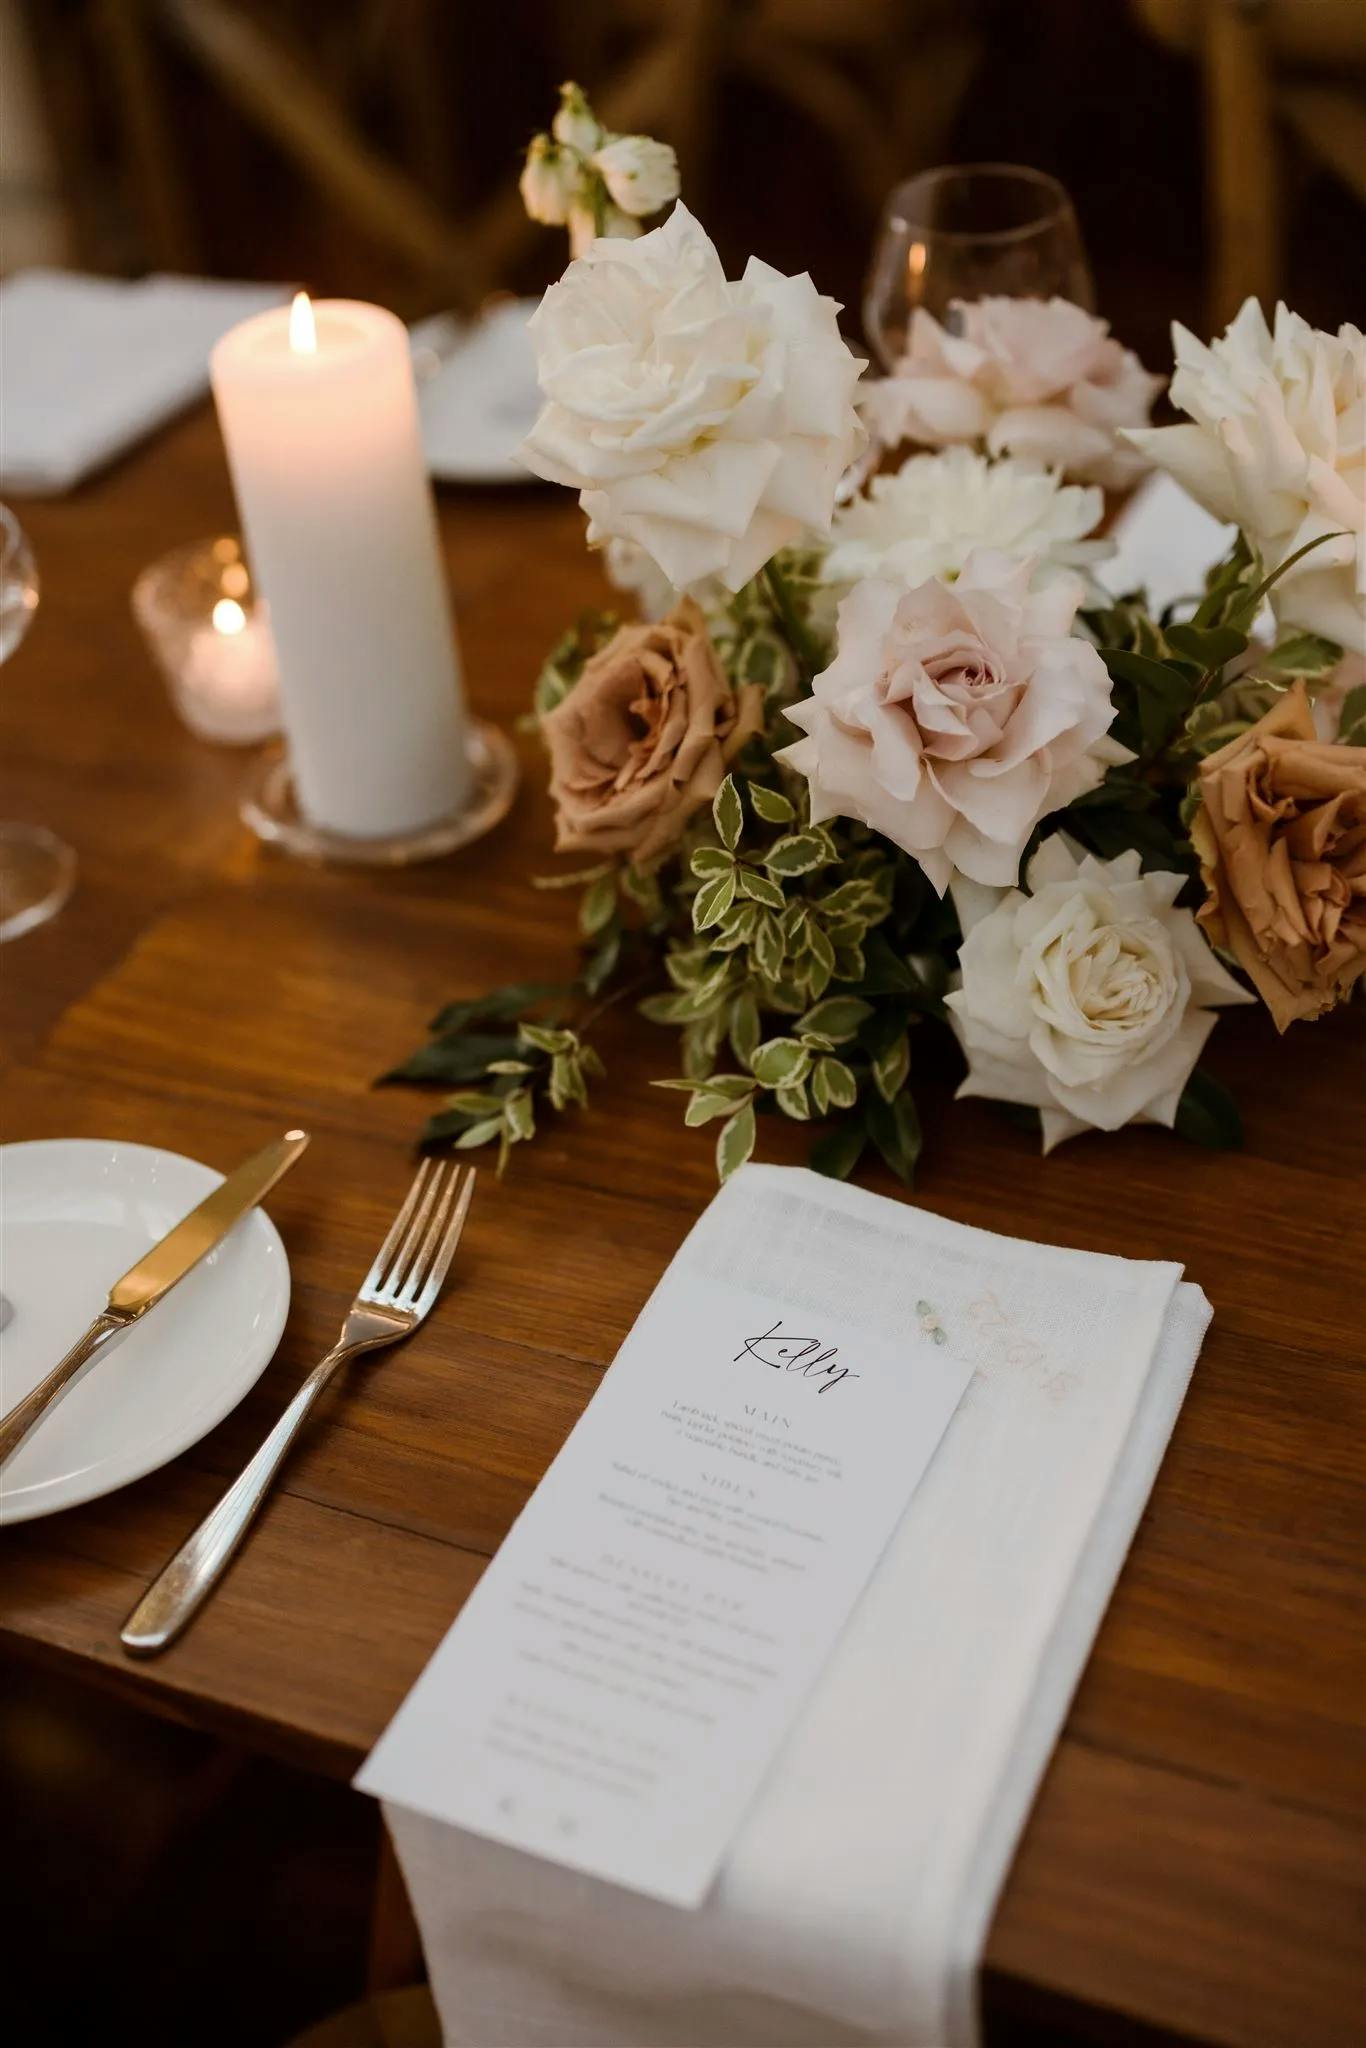 Flowers and cutlery on wedding tables